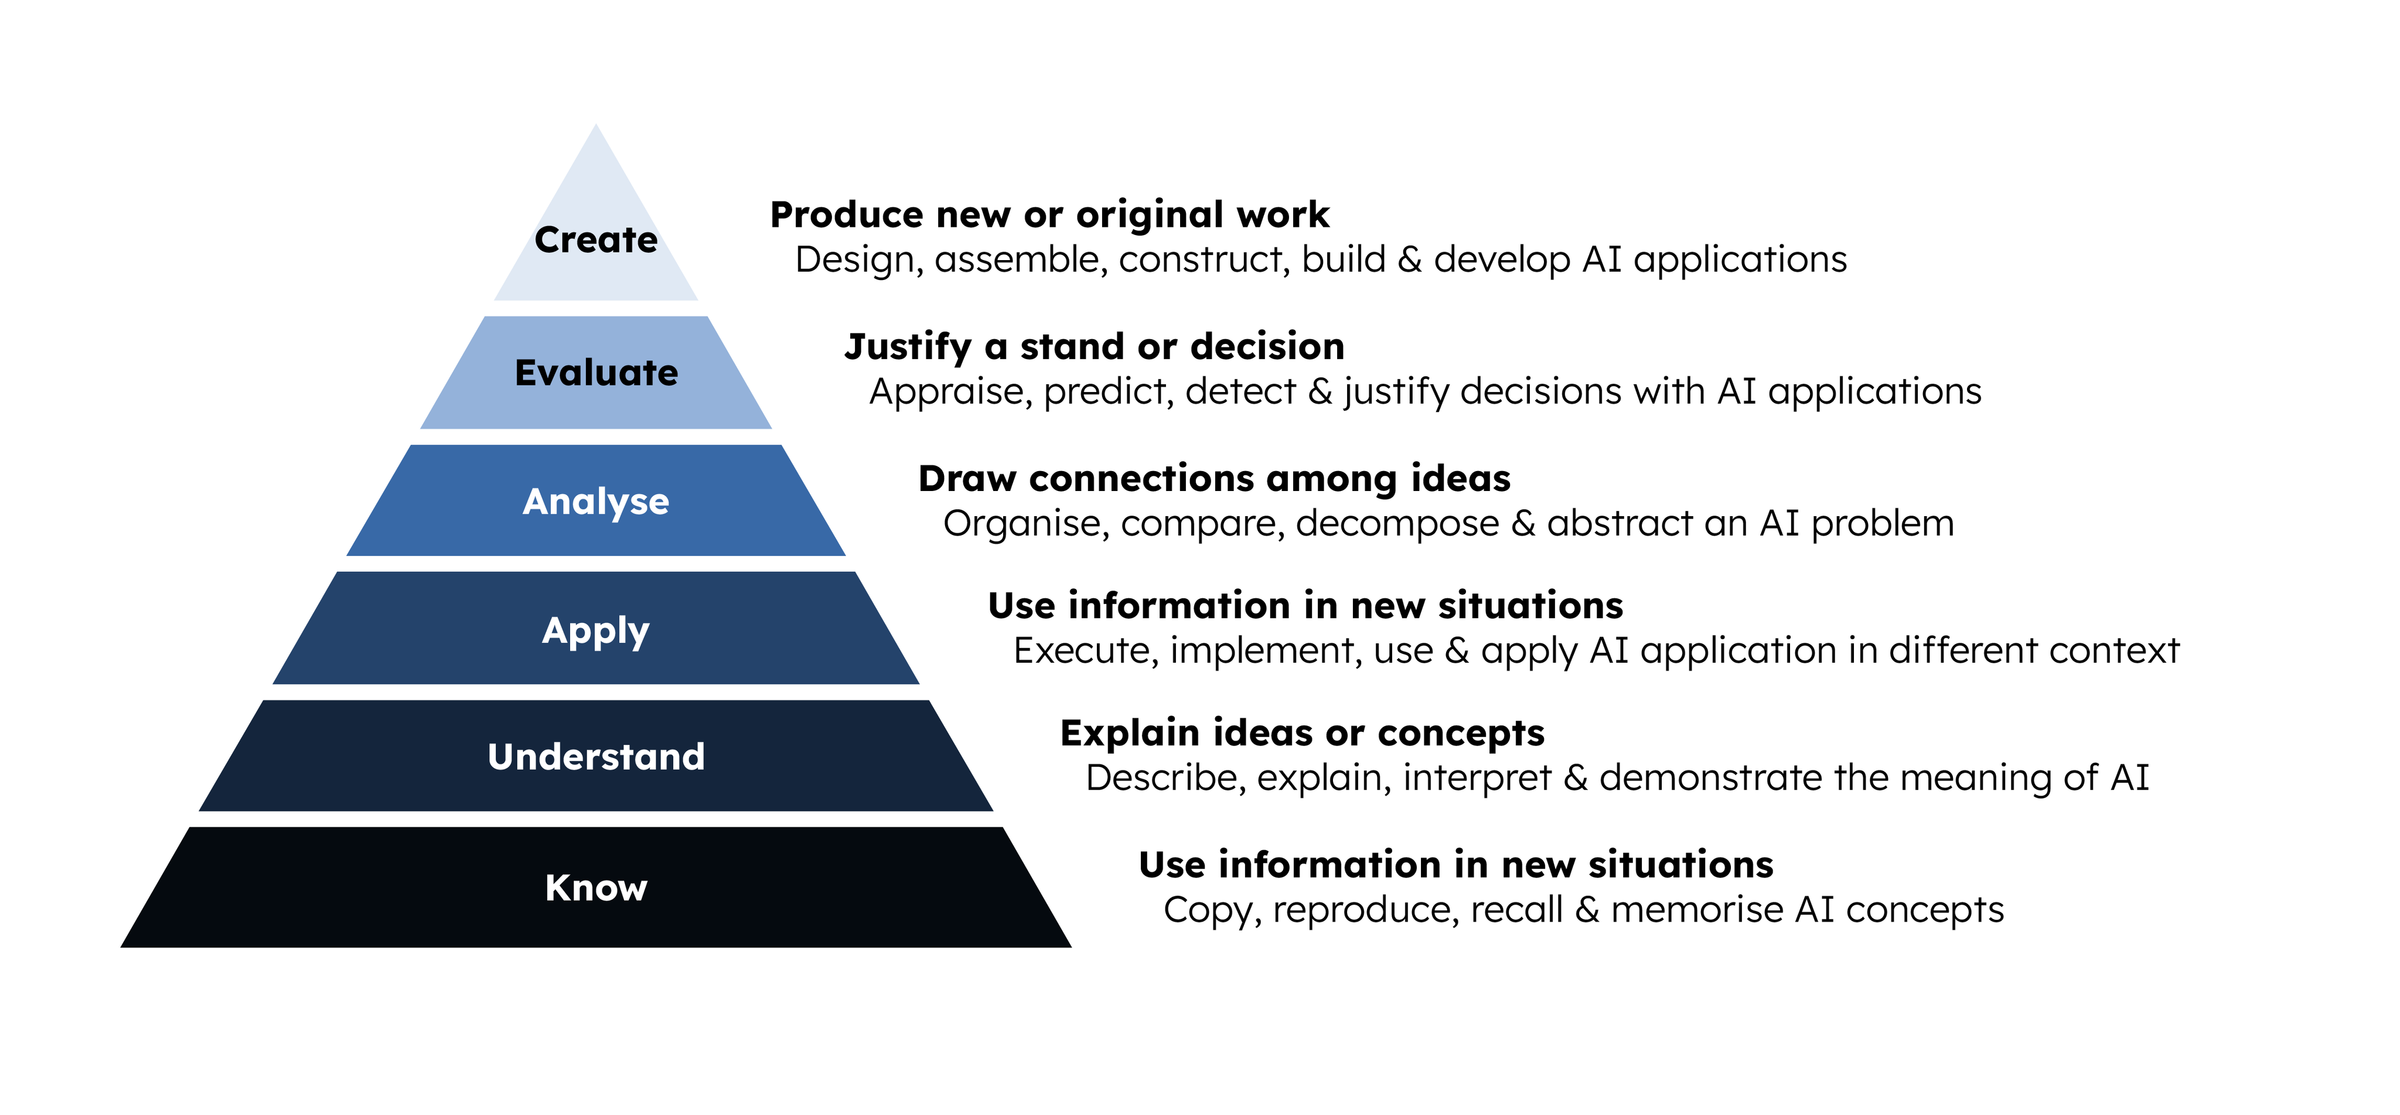 Pyramid model catergorising levels of AI literacy from 'know' at the base to 'create' at the peak